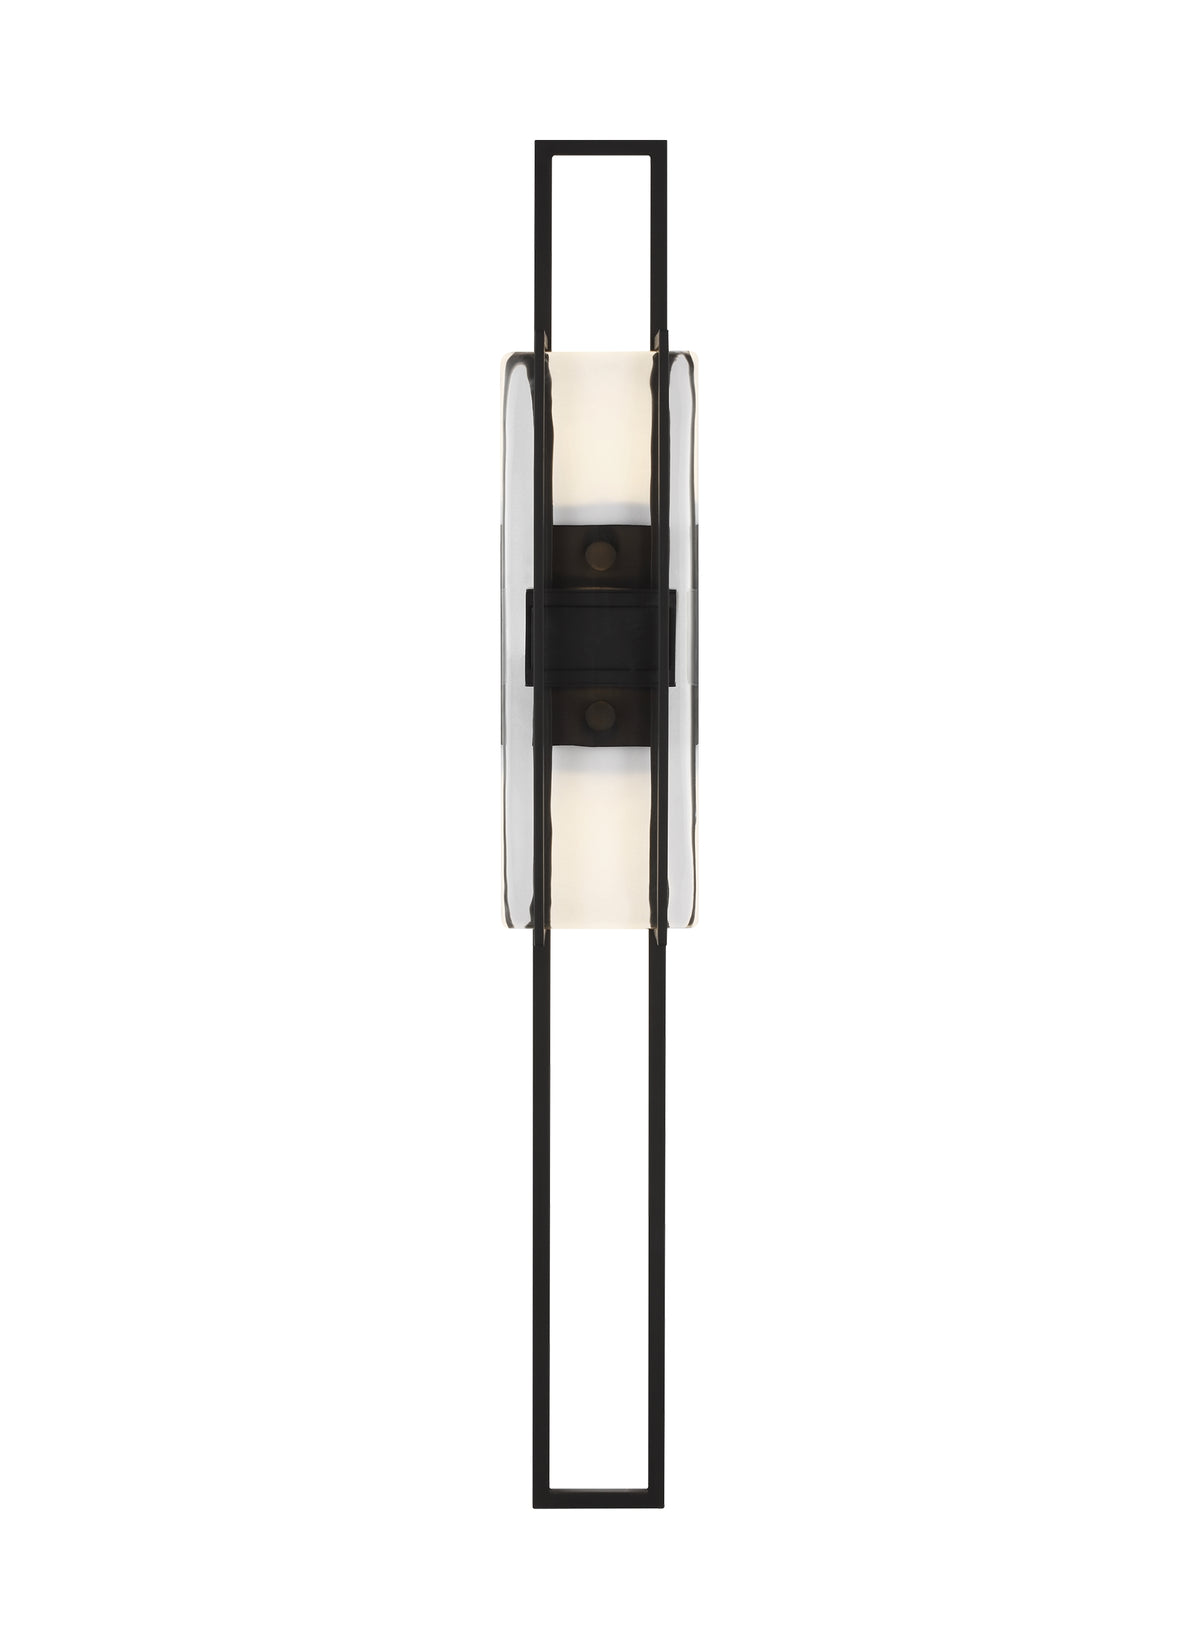 Tech Lighting, Duelle Wall Sconce